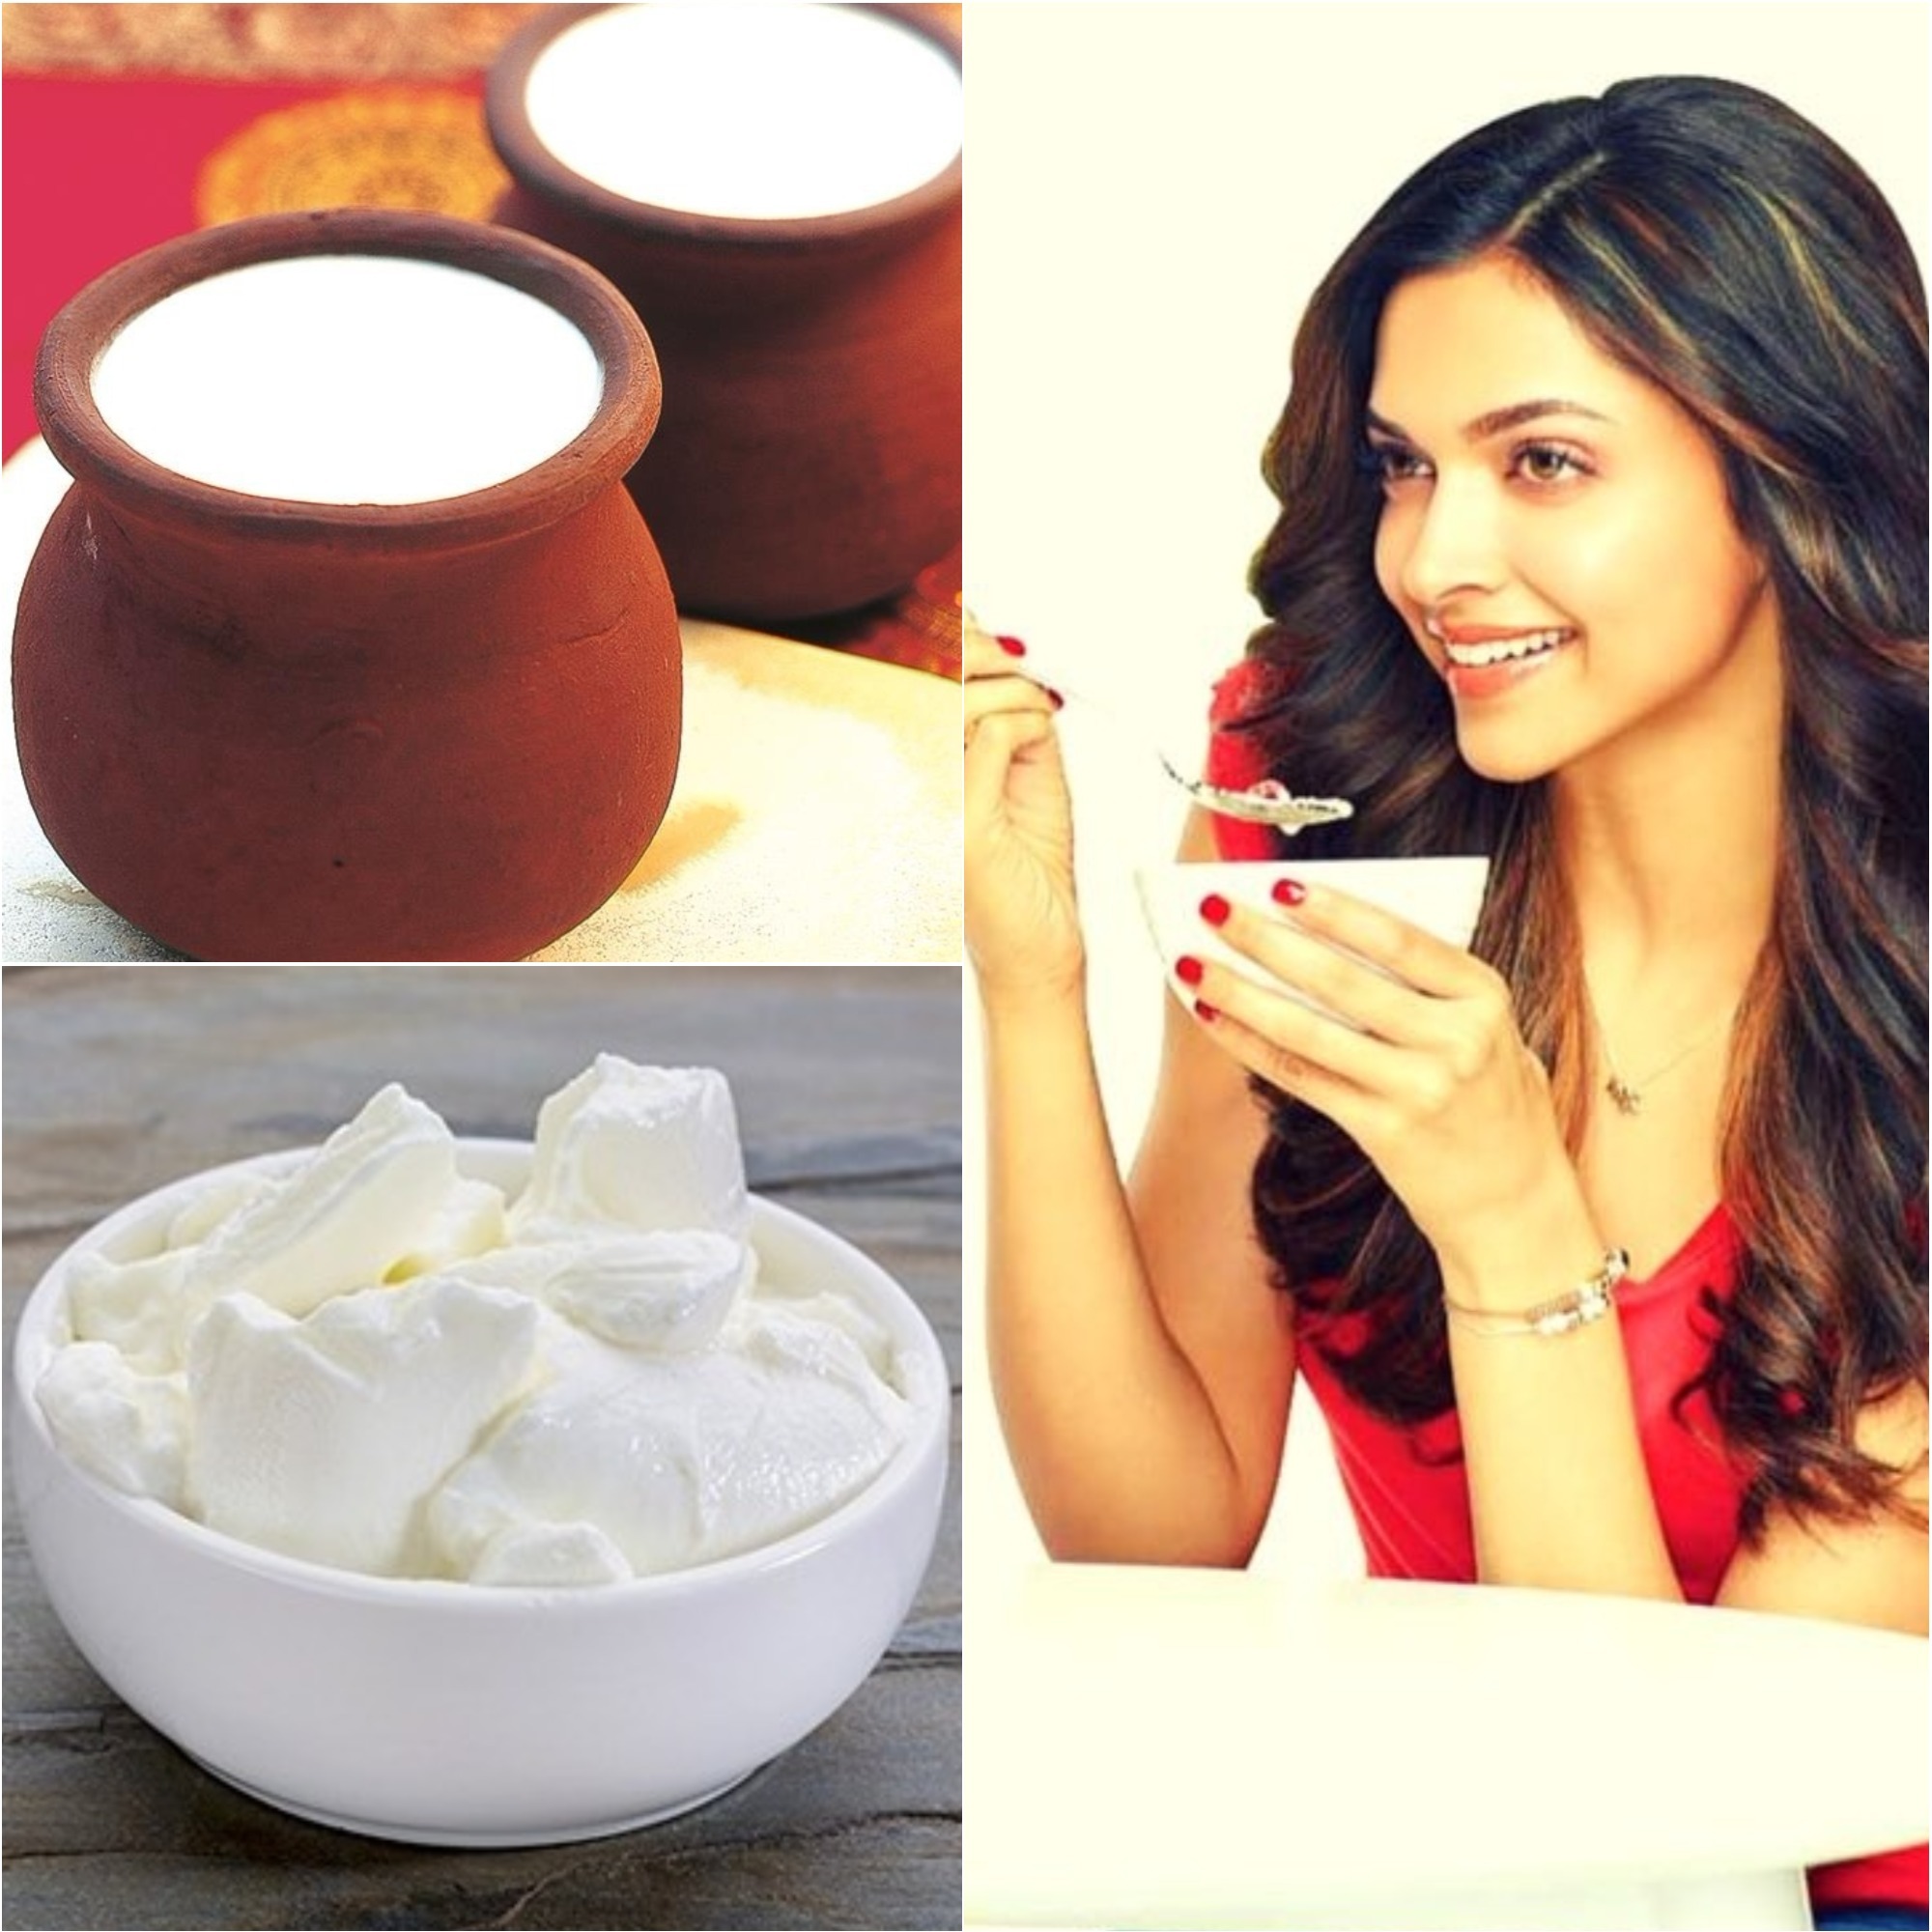 Yogurt and its multiple  beauty benefits which will bring out the diva in you